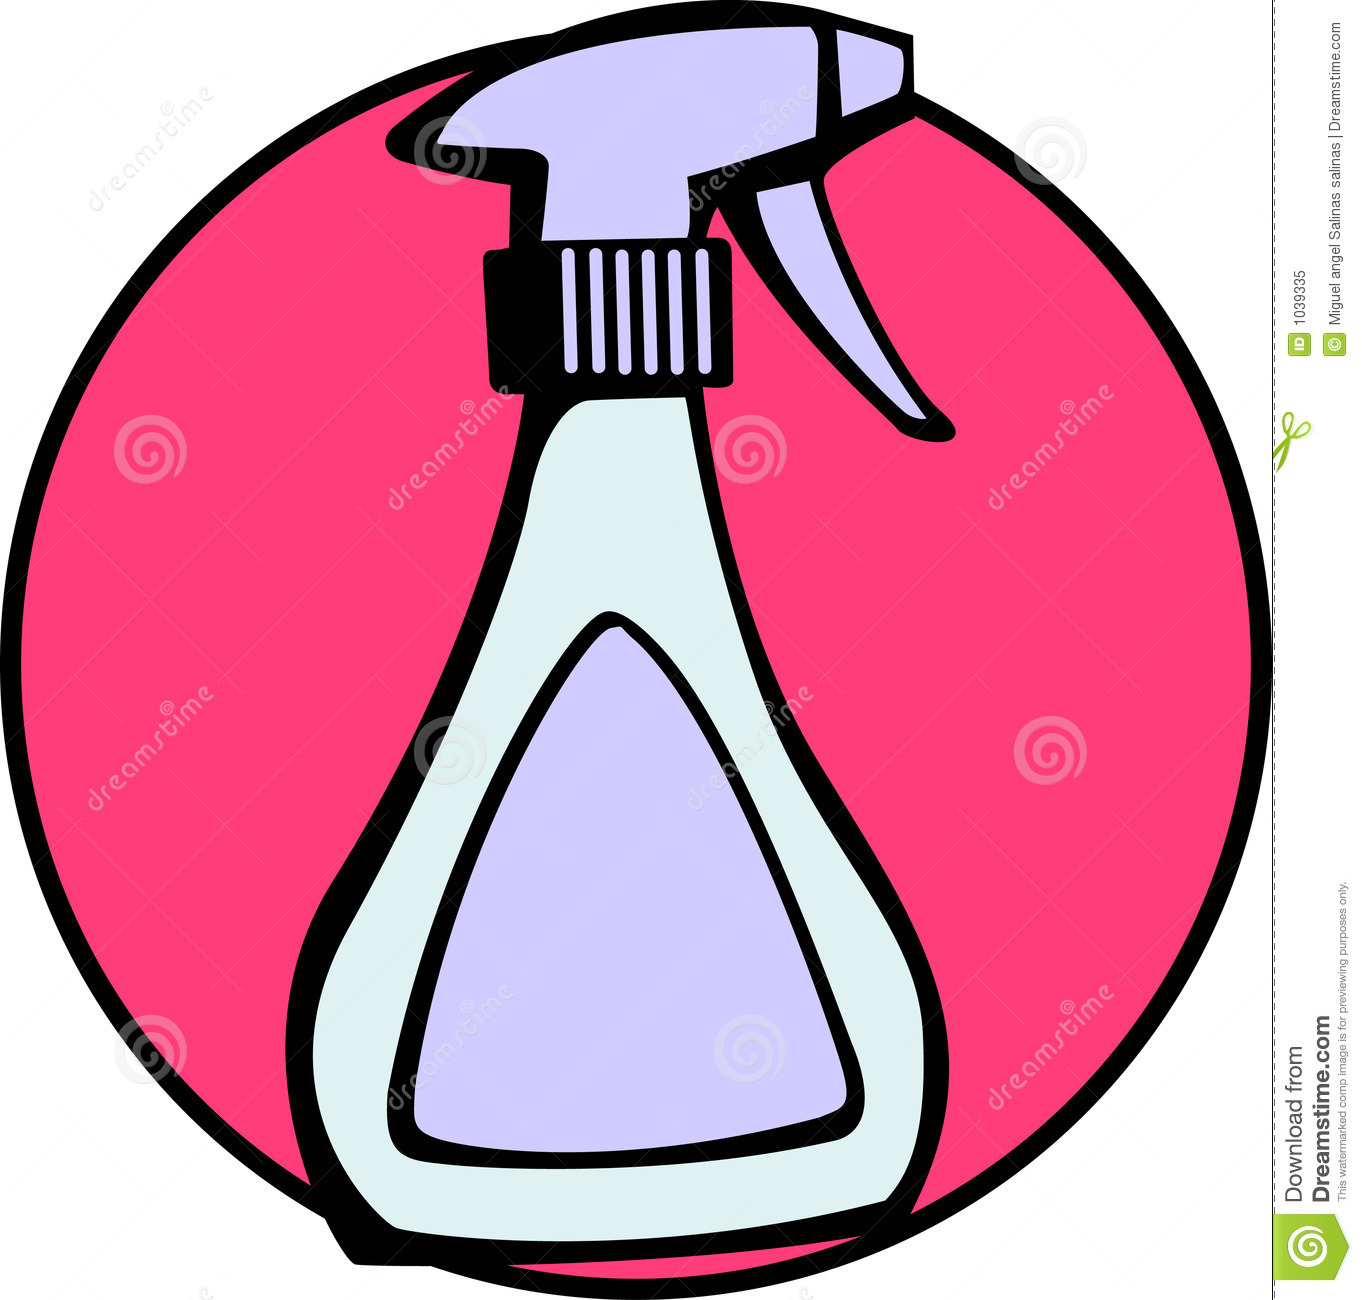 Illustration Of A Cleaner Liquid Spray Bottle  Vector File Available